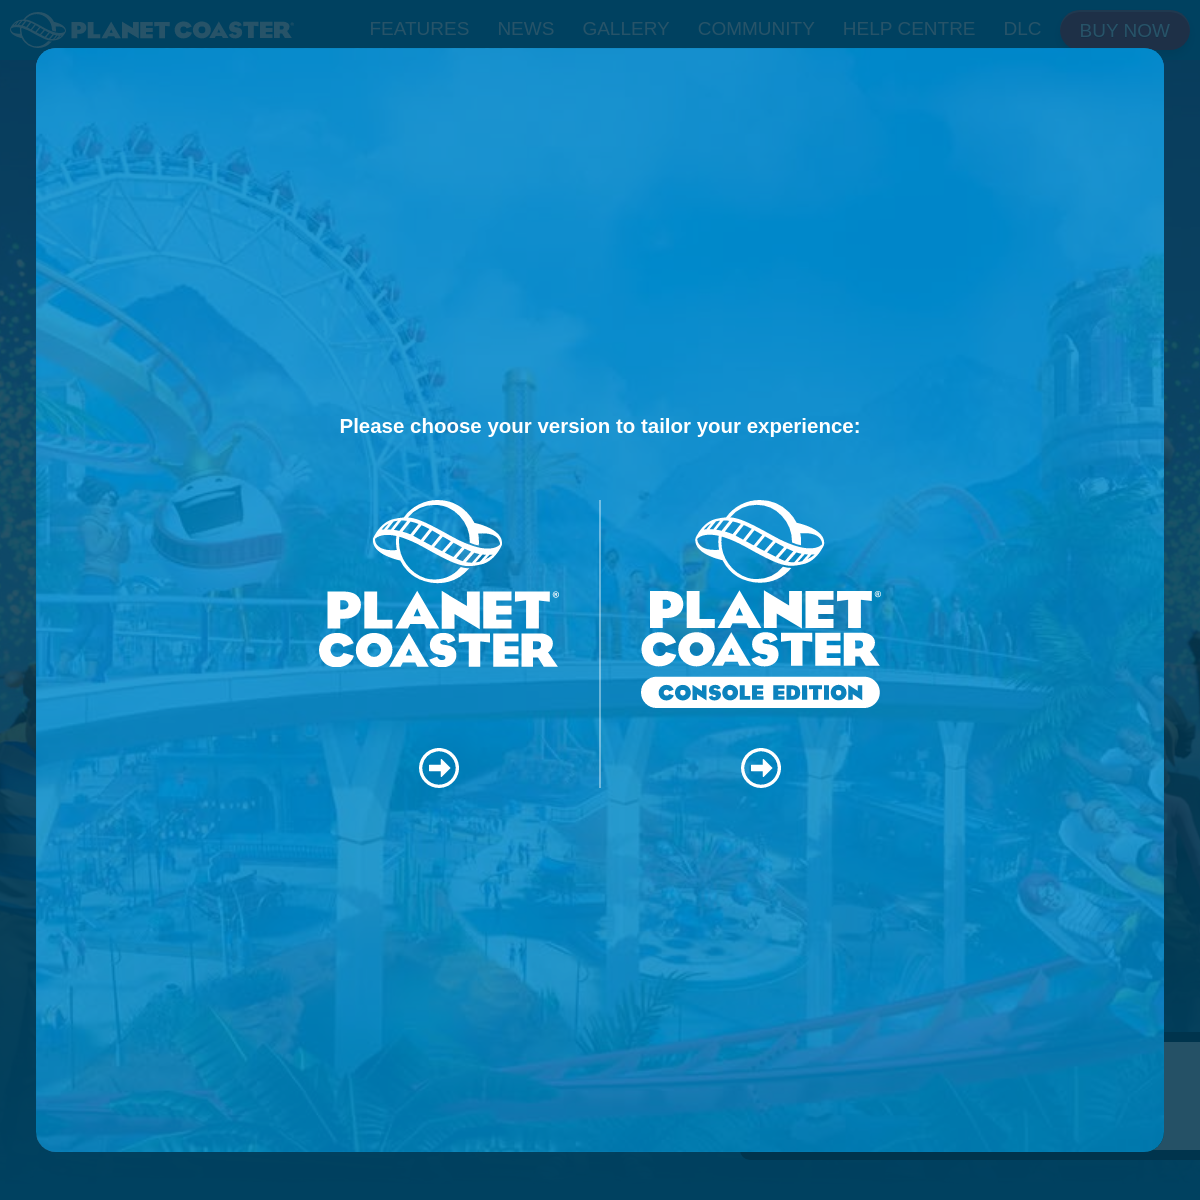 A complete backup of planetcoaster.com